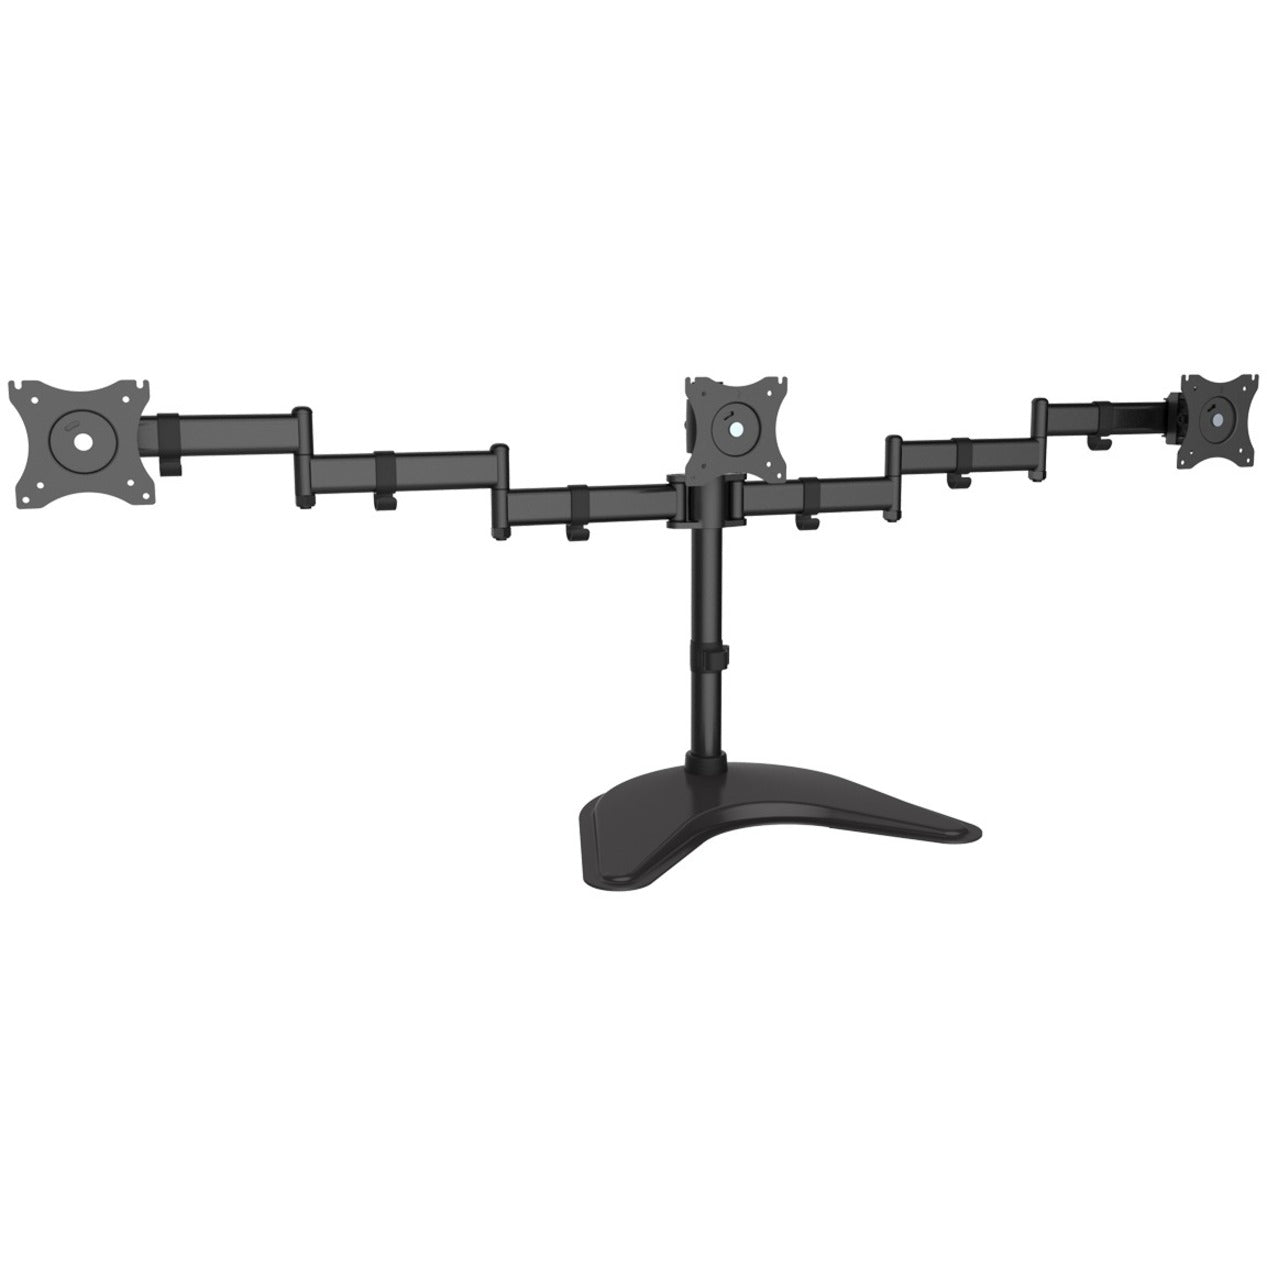 SIIG CE-MT1V12-S1 Articulated Freestanding Triple Monitor Desk Stand - 13"-27", Swivel, Tilt, Ergonomic, Cable Management, 360° Rotation, 5 Year Warranty